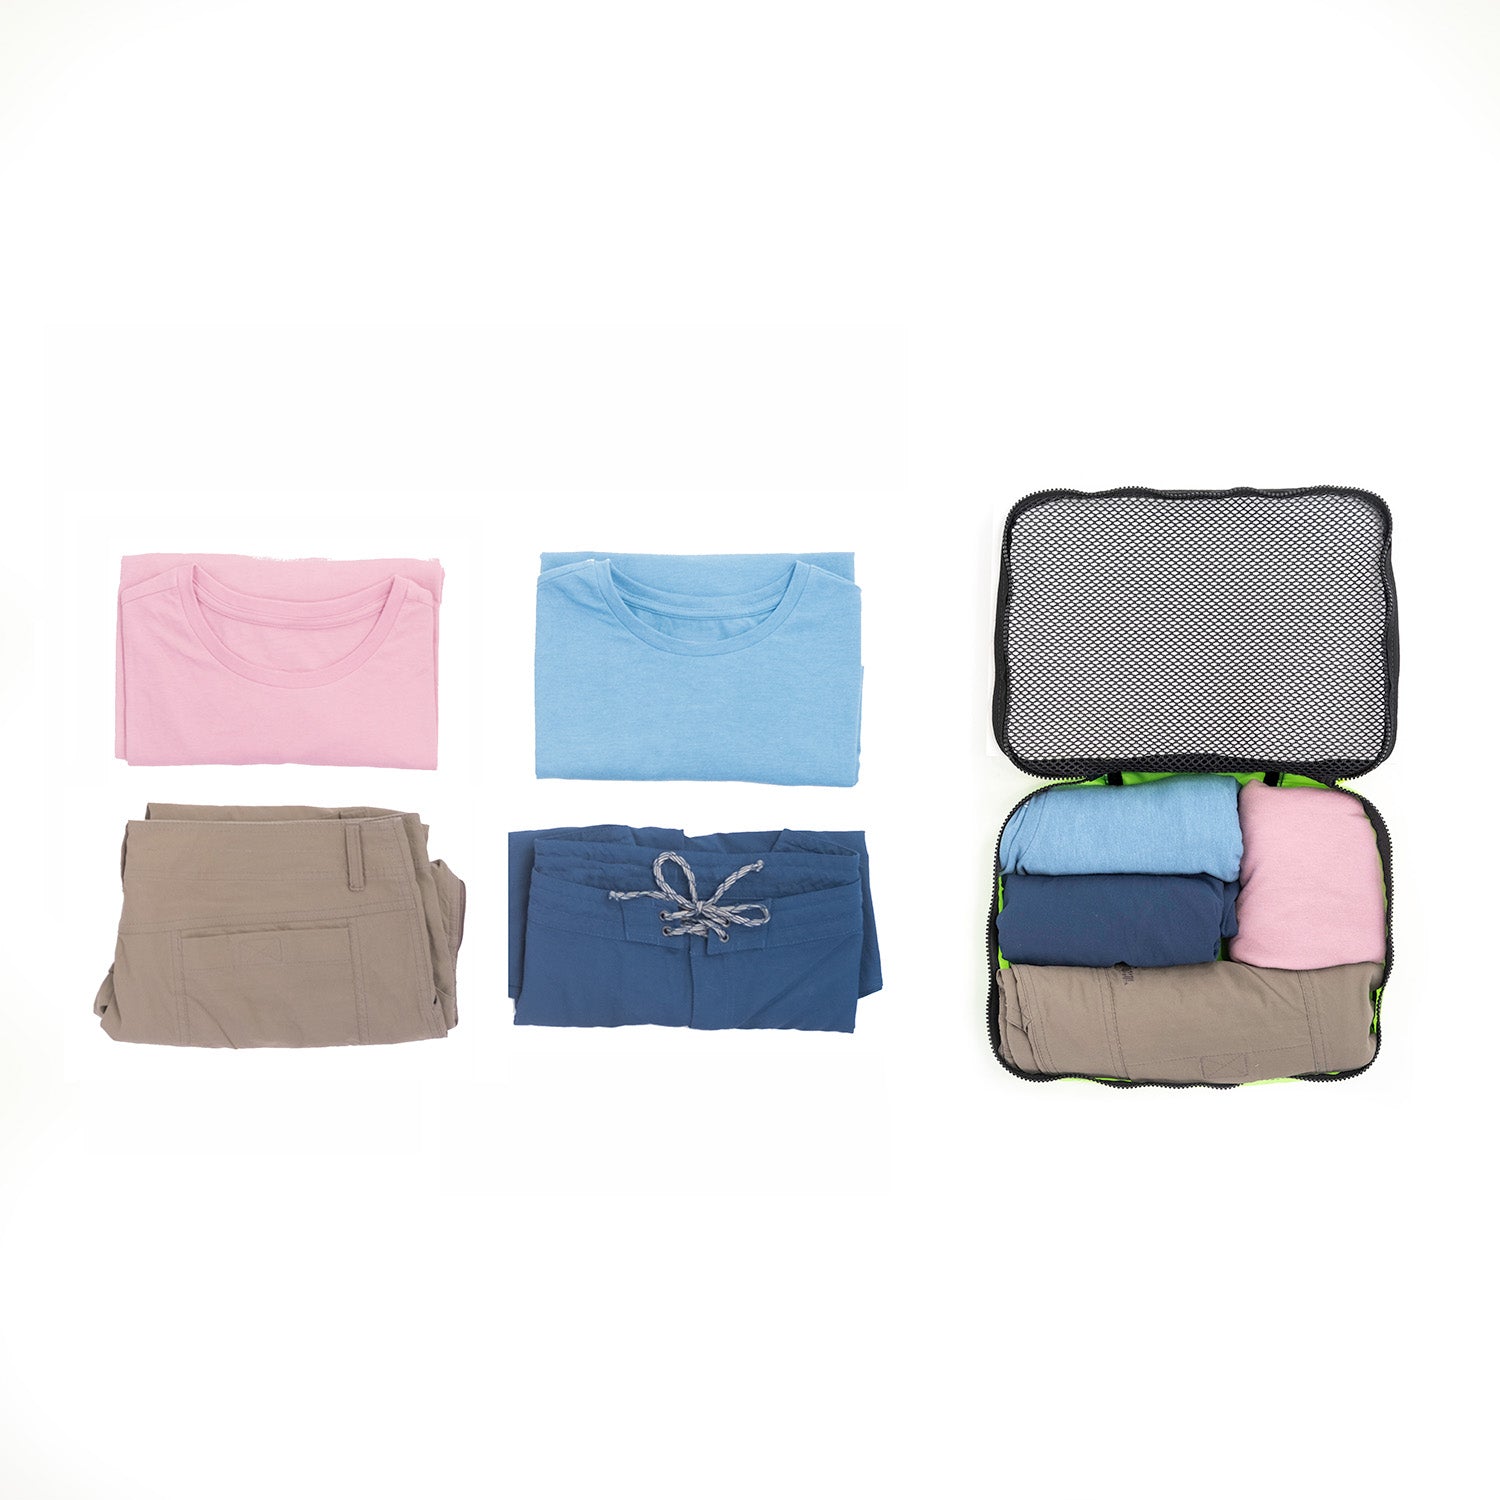 Packing cube is a great fit for T shirts and shorts.